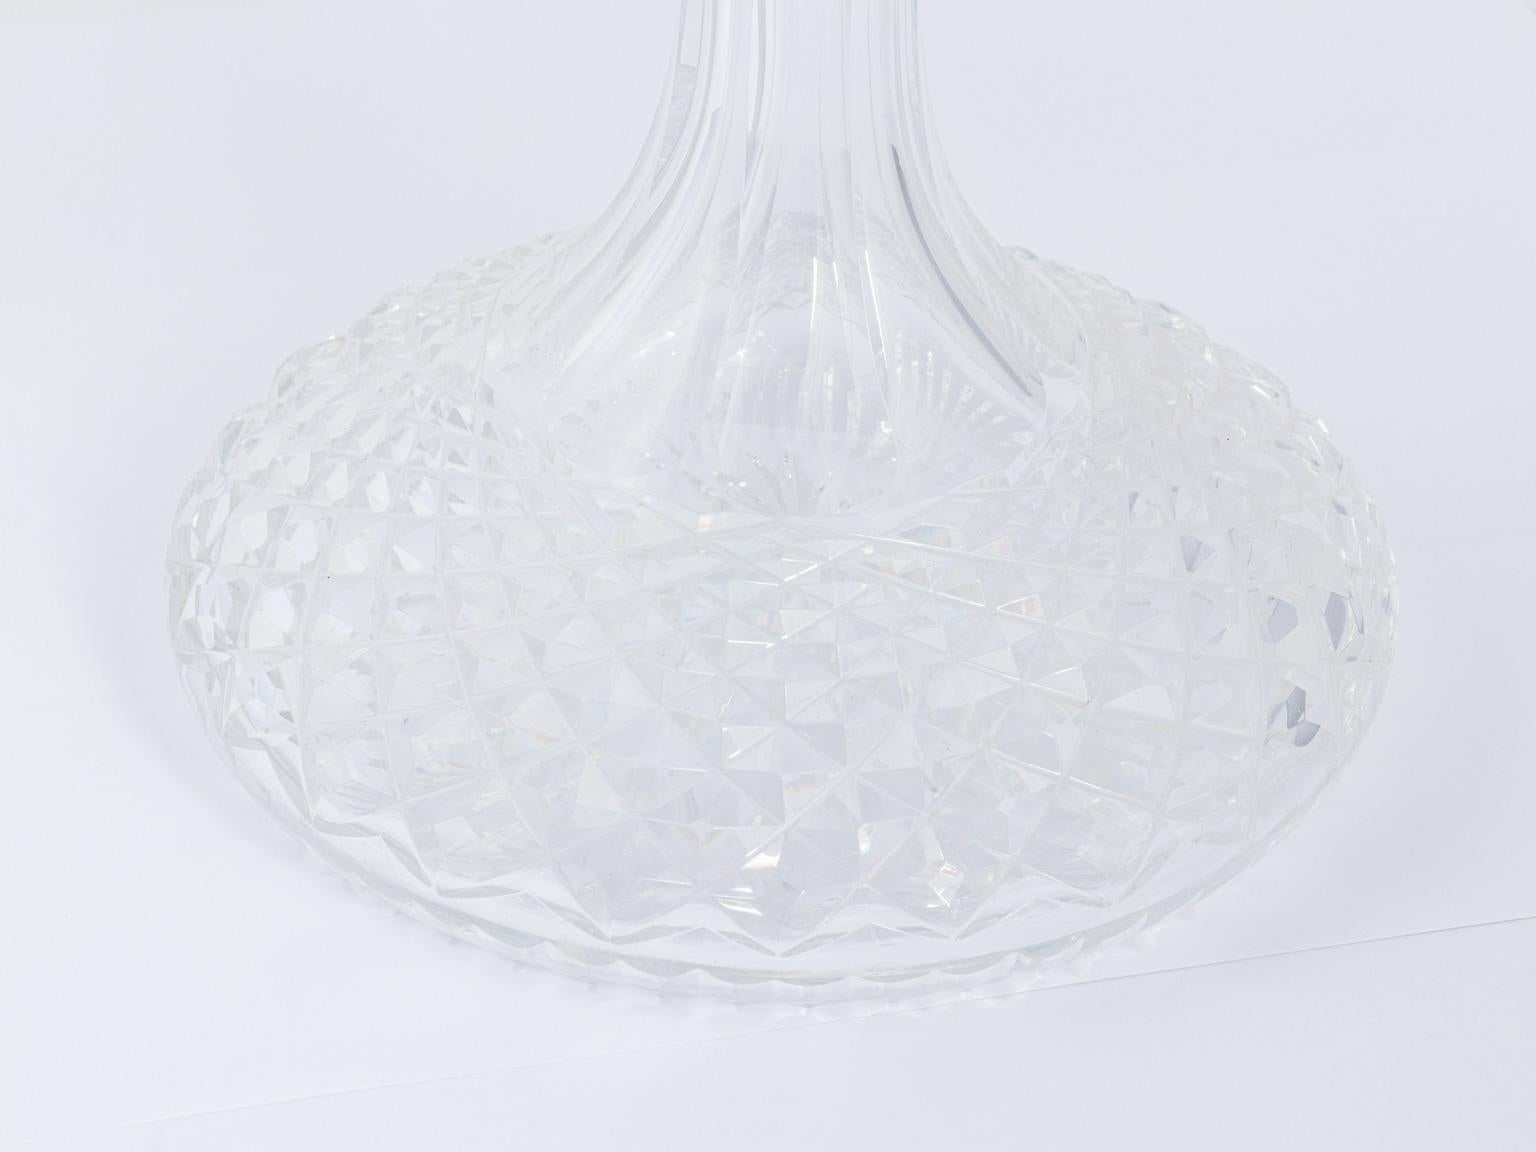 Pair of cut crystal decanters with ball finial stoppers, circa 20th century.
   